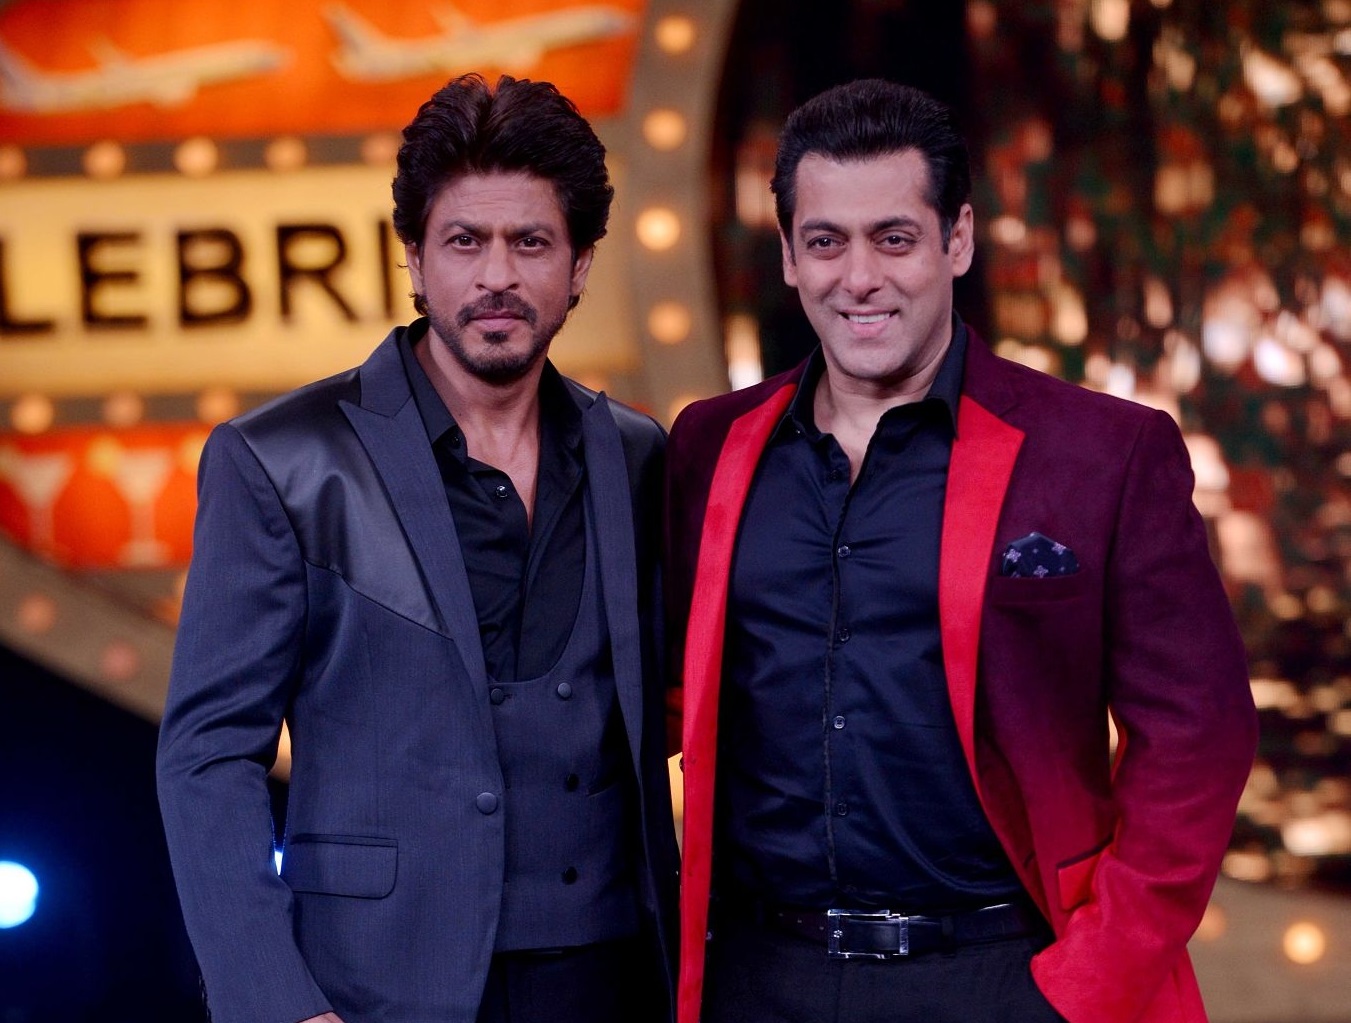 Shah Rukh Khan Unhappy as Salman Khan's cameo leaked online by fans